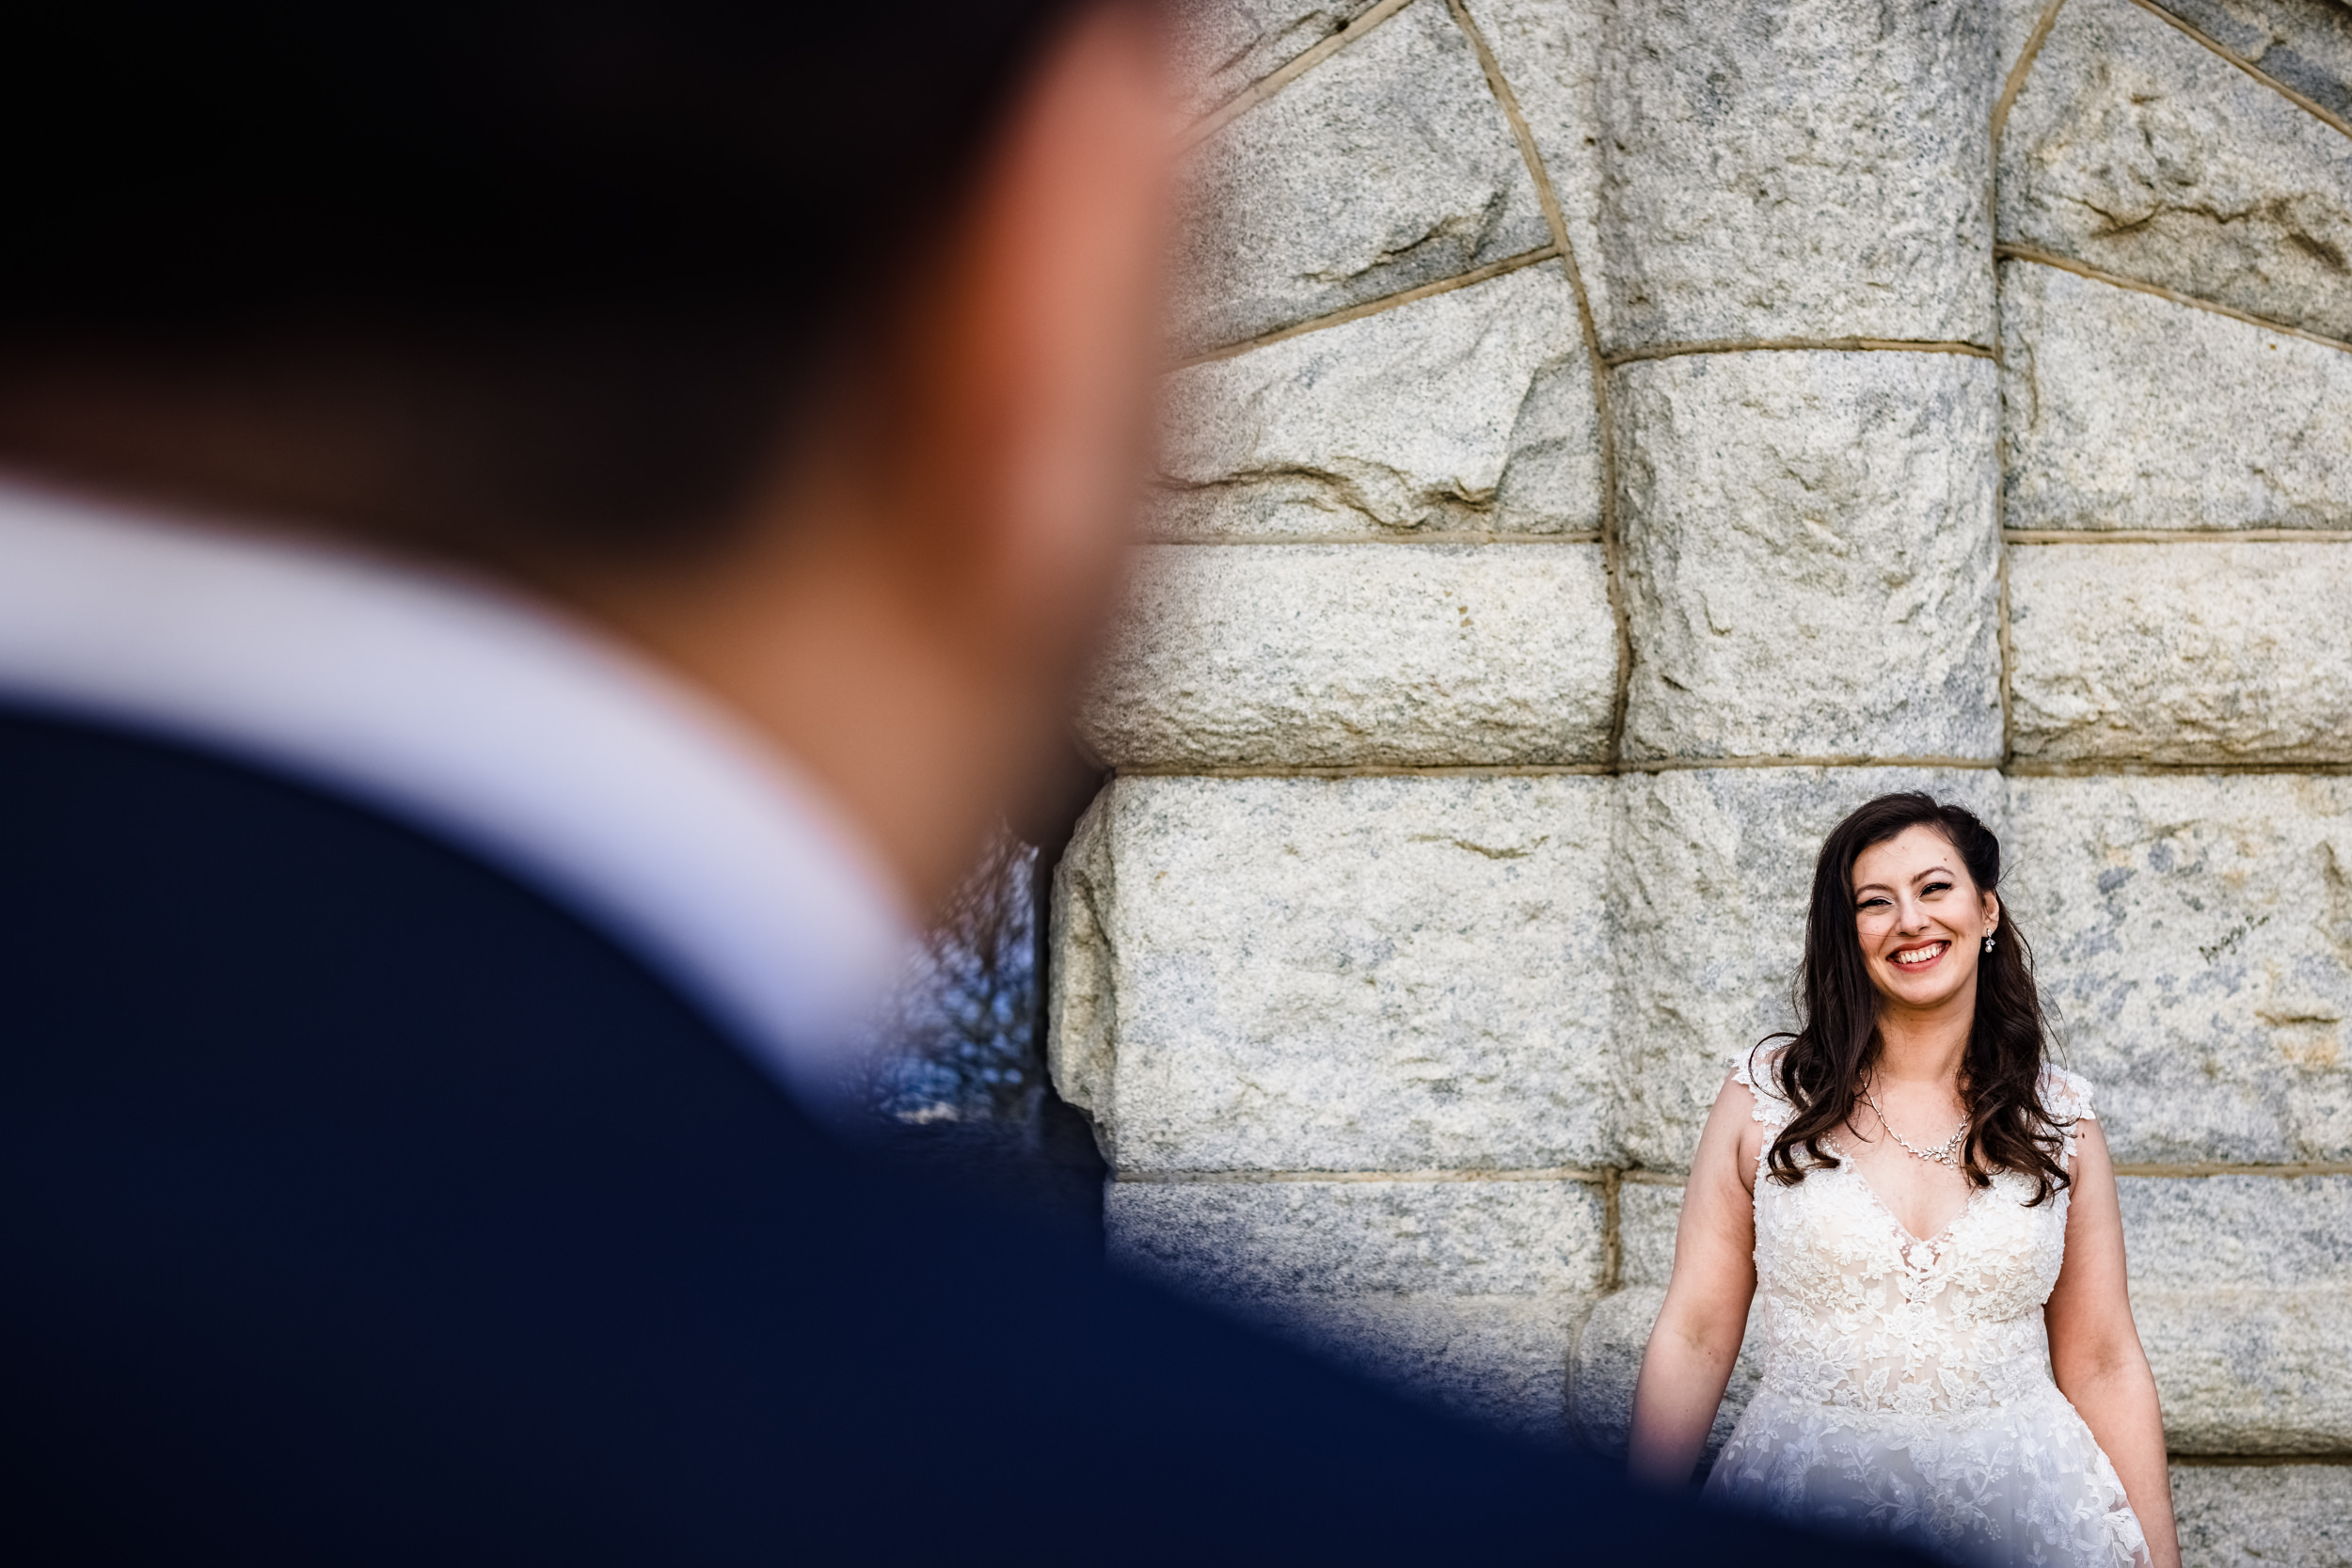 A bride smiles at her groom during a Lincoln Park elopement in Chicago.